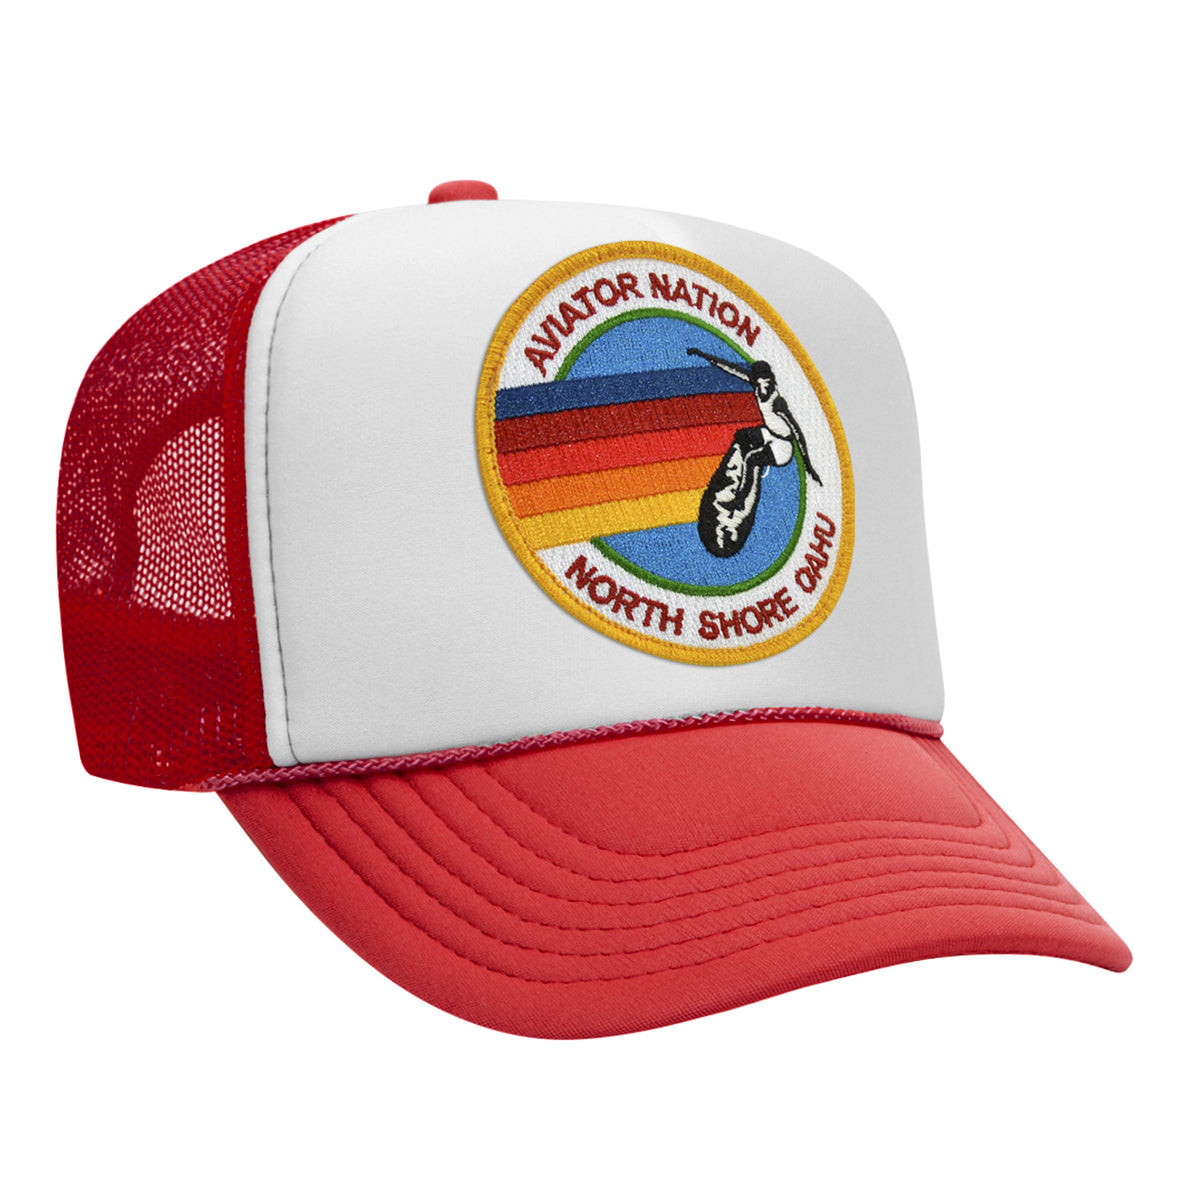 AVIATOR NATION NORTH SHORE TRUCKER HAT HATS Aviator Nation OS RED // WHITE // RED 